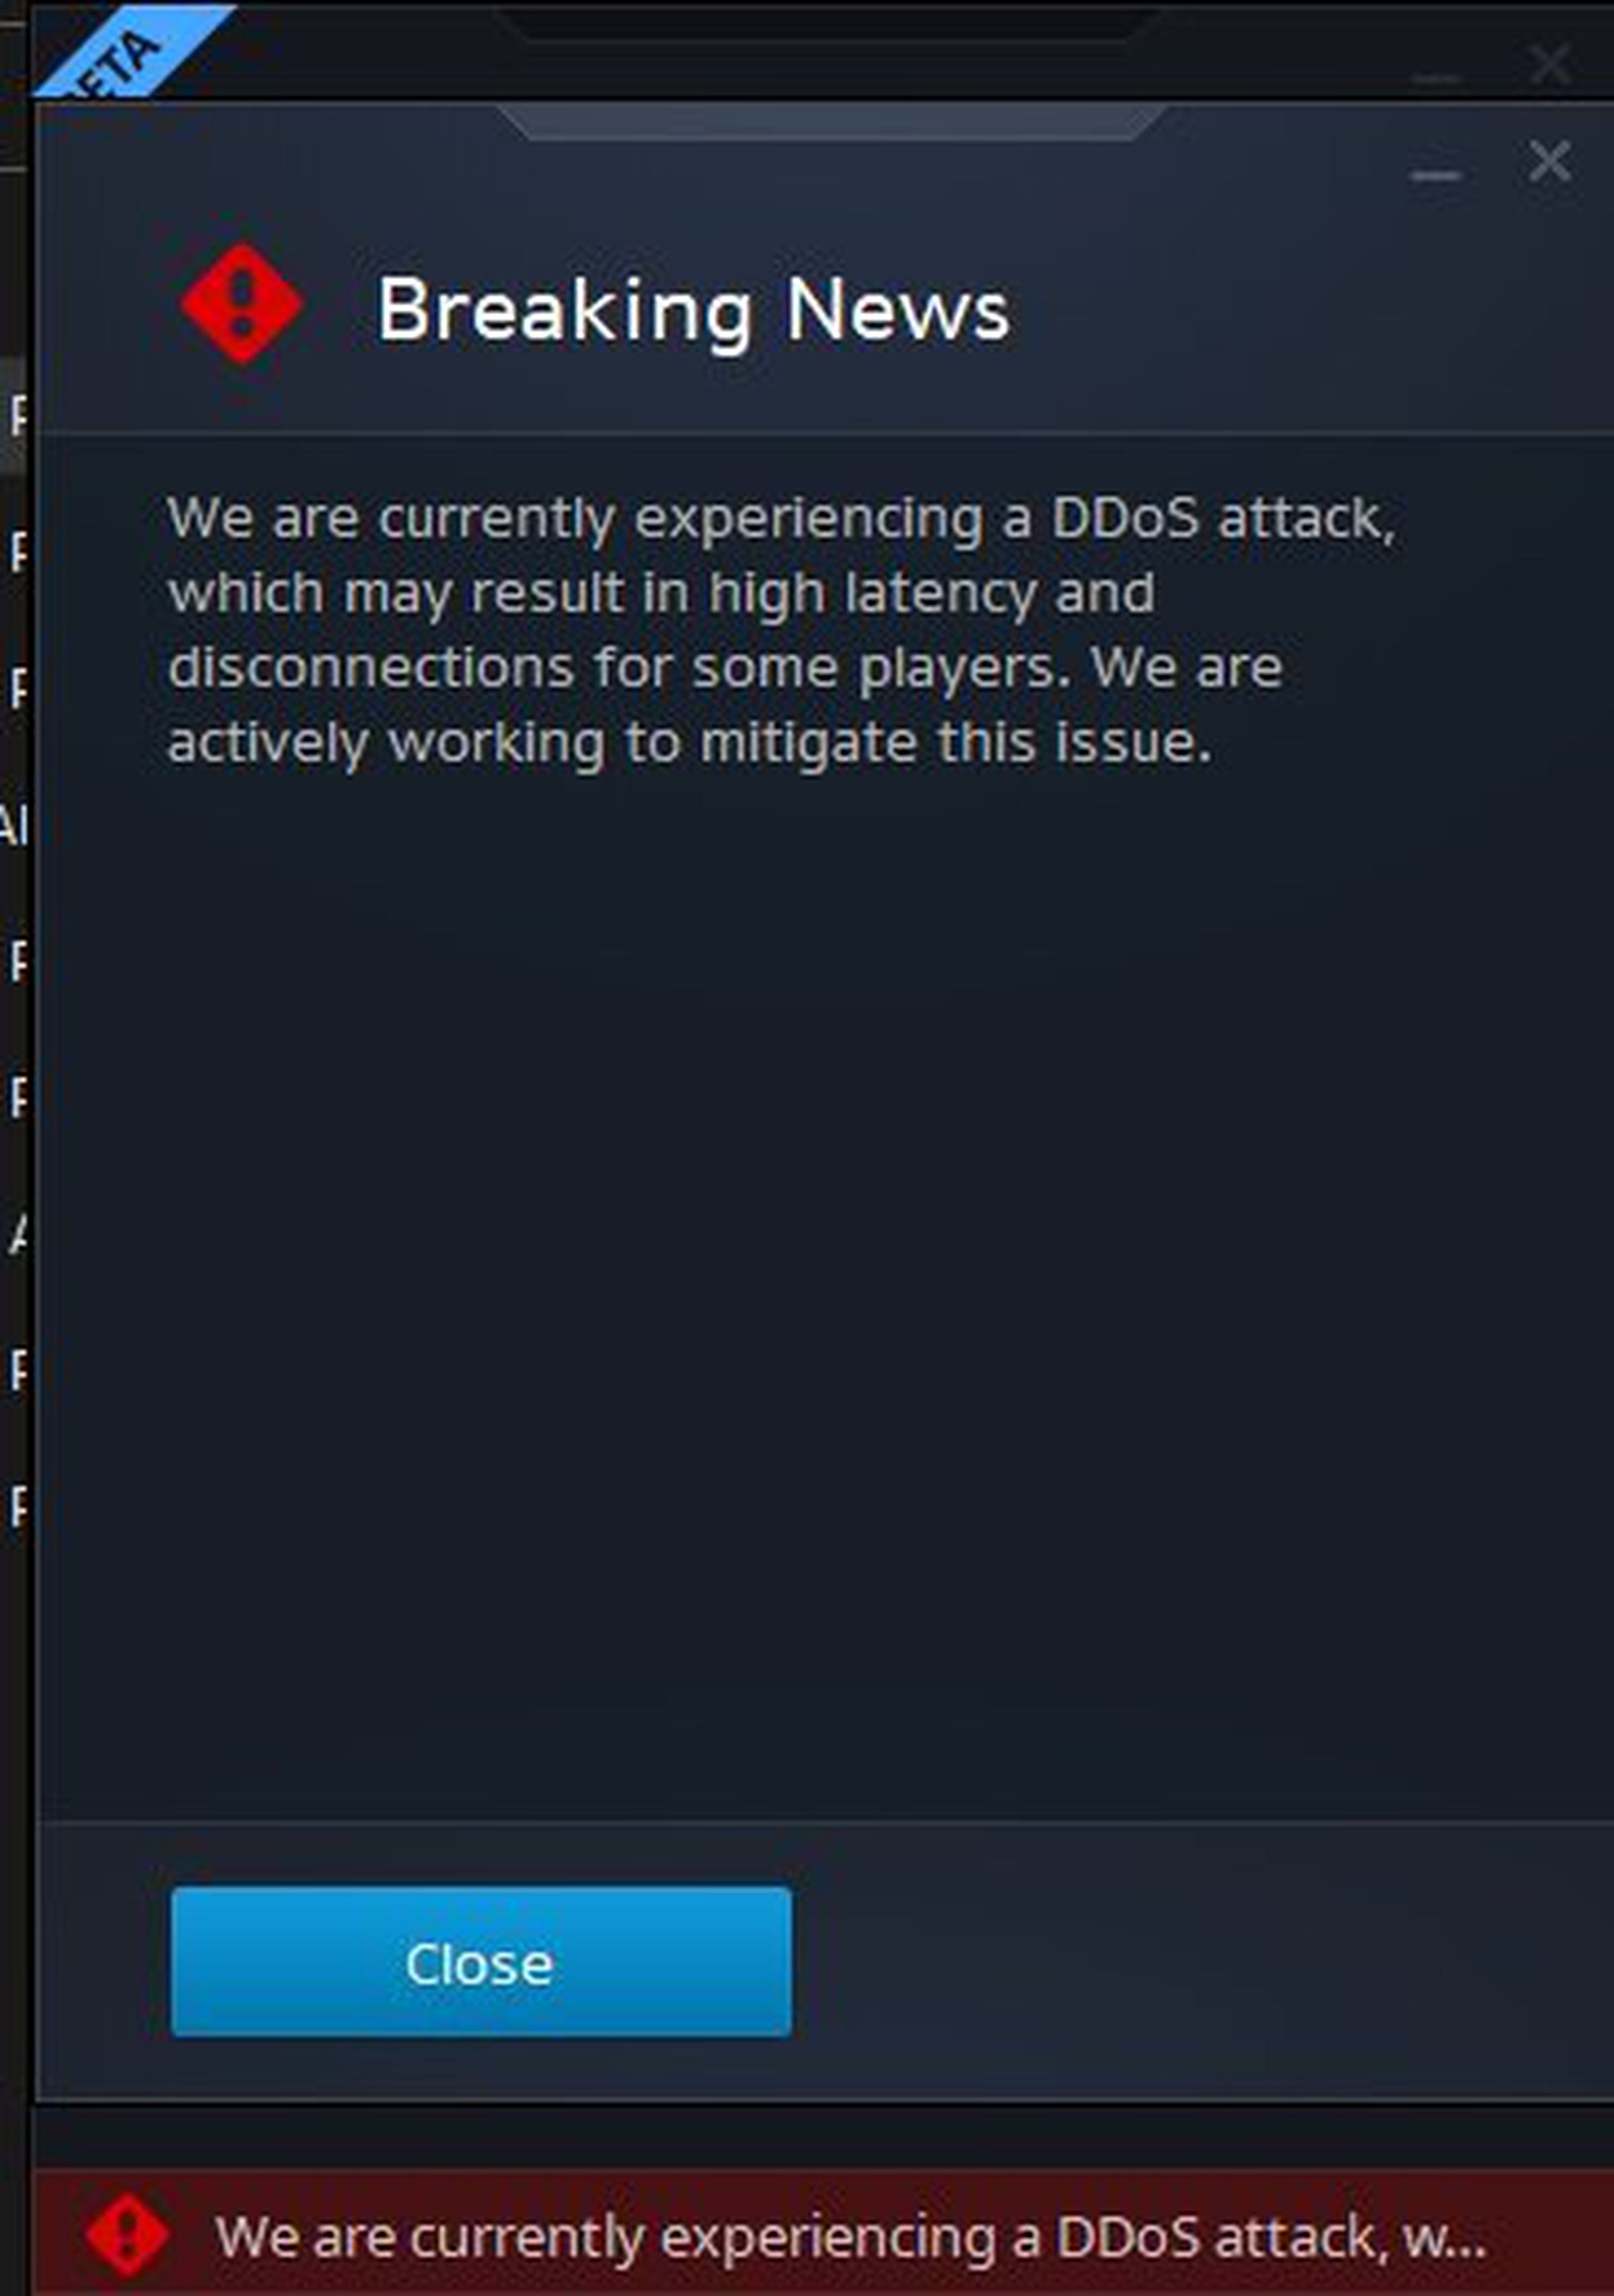 A news message that popped up in Battle.net warning users that there was a DDoS attack occurring.